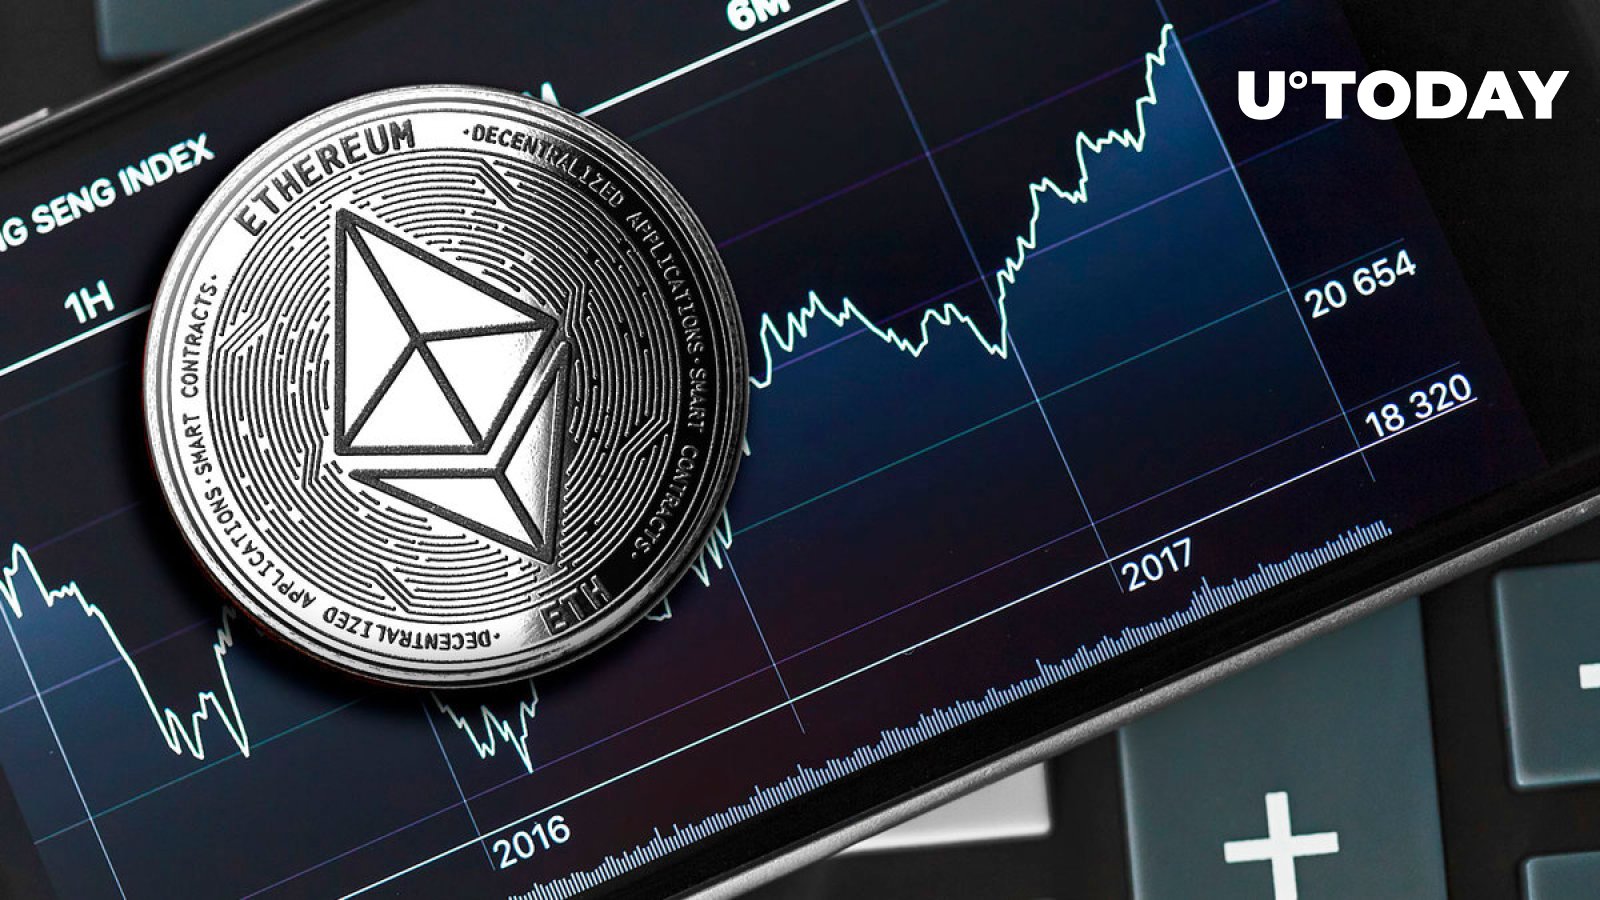 Will Ethereum (ETH) Hit $3,000 Again? Here Are Factors to Watch